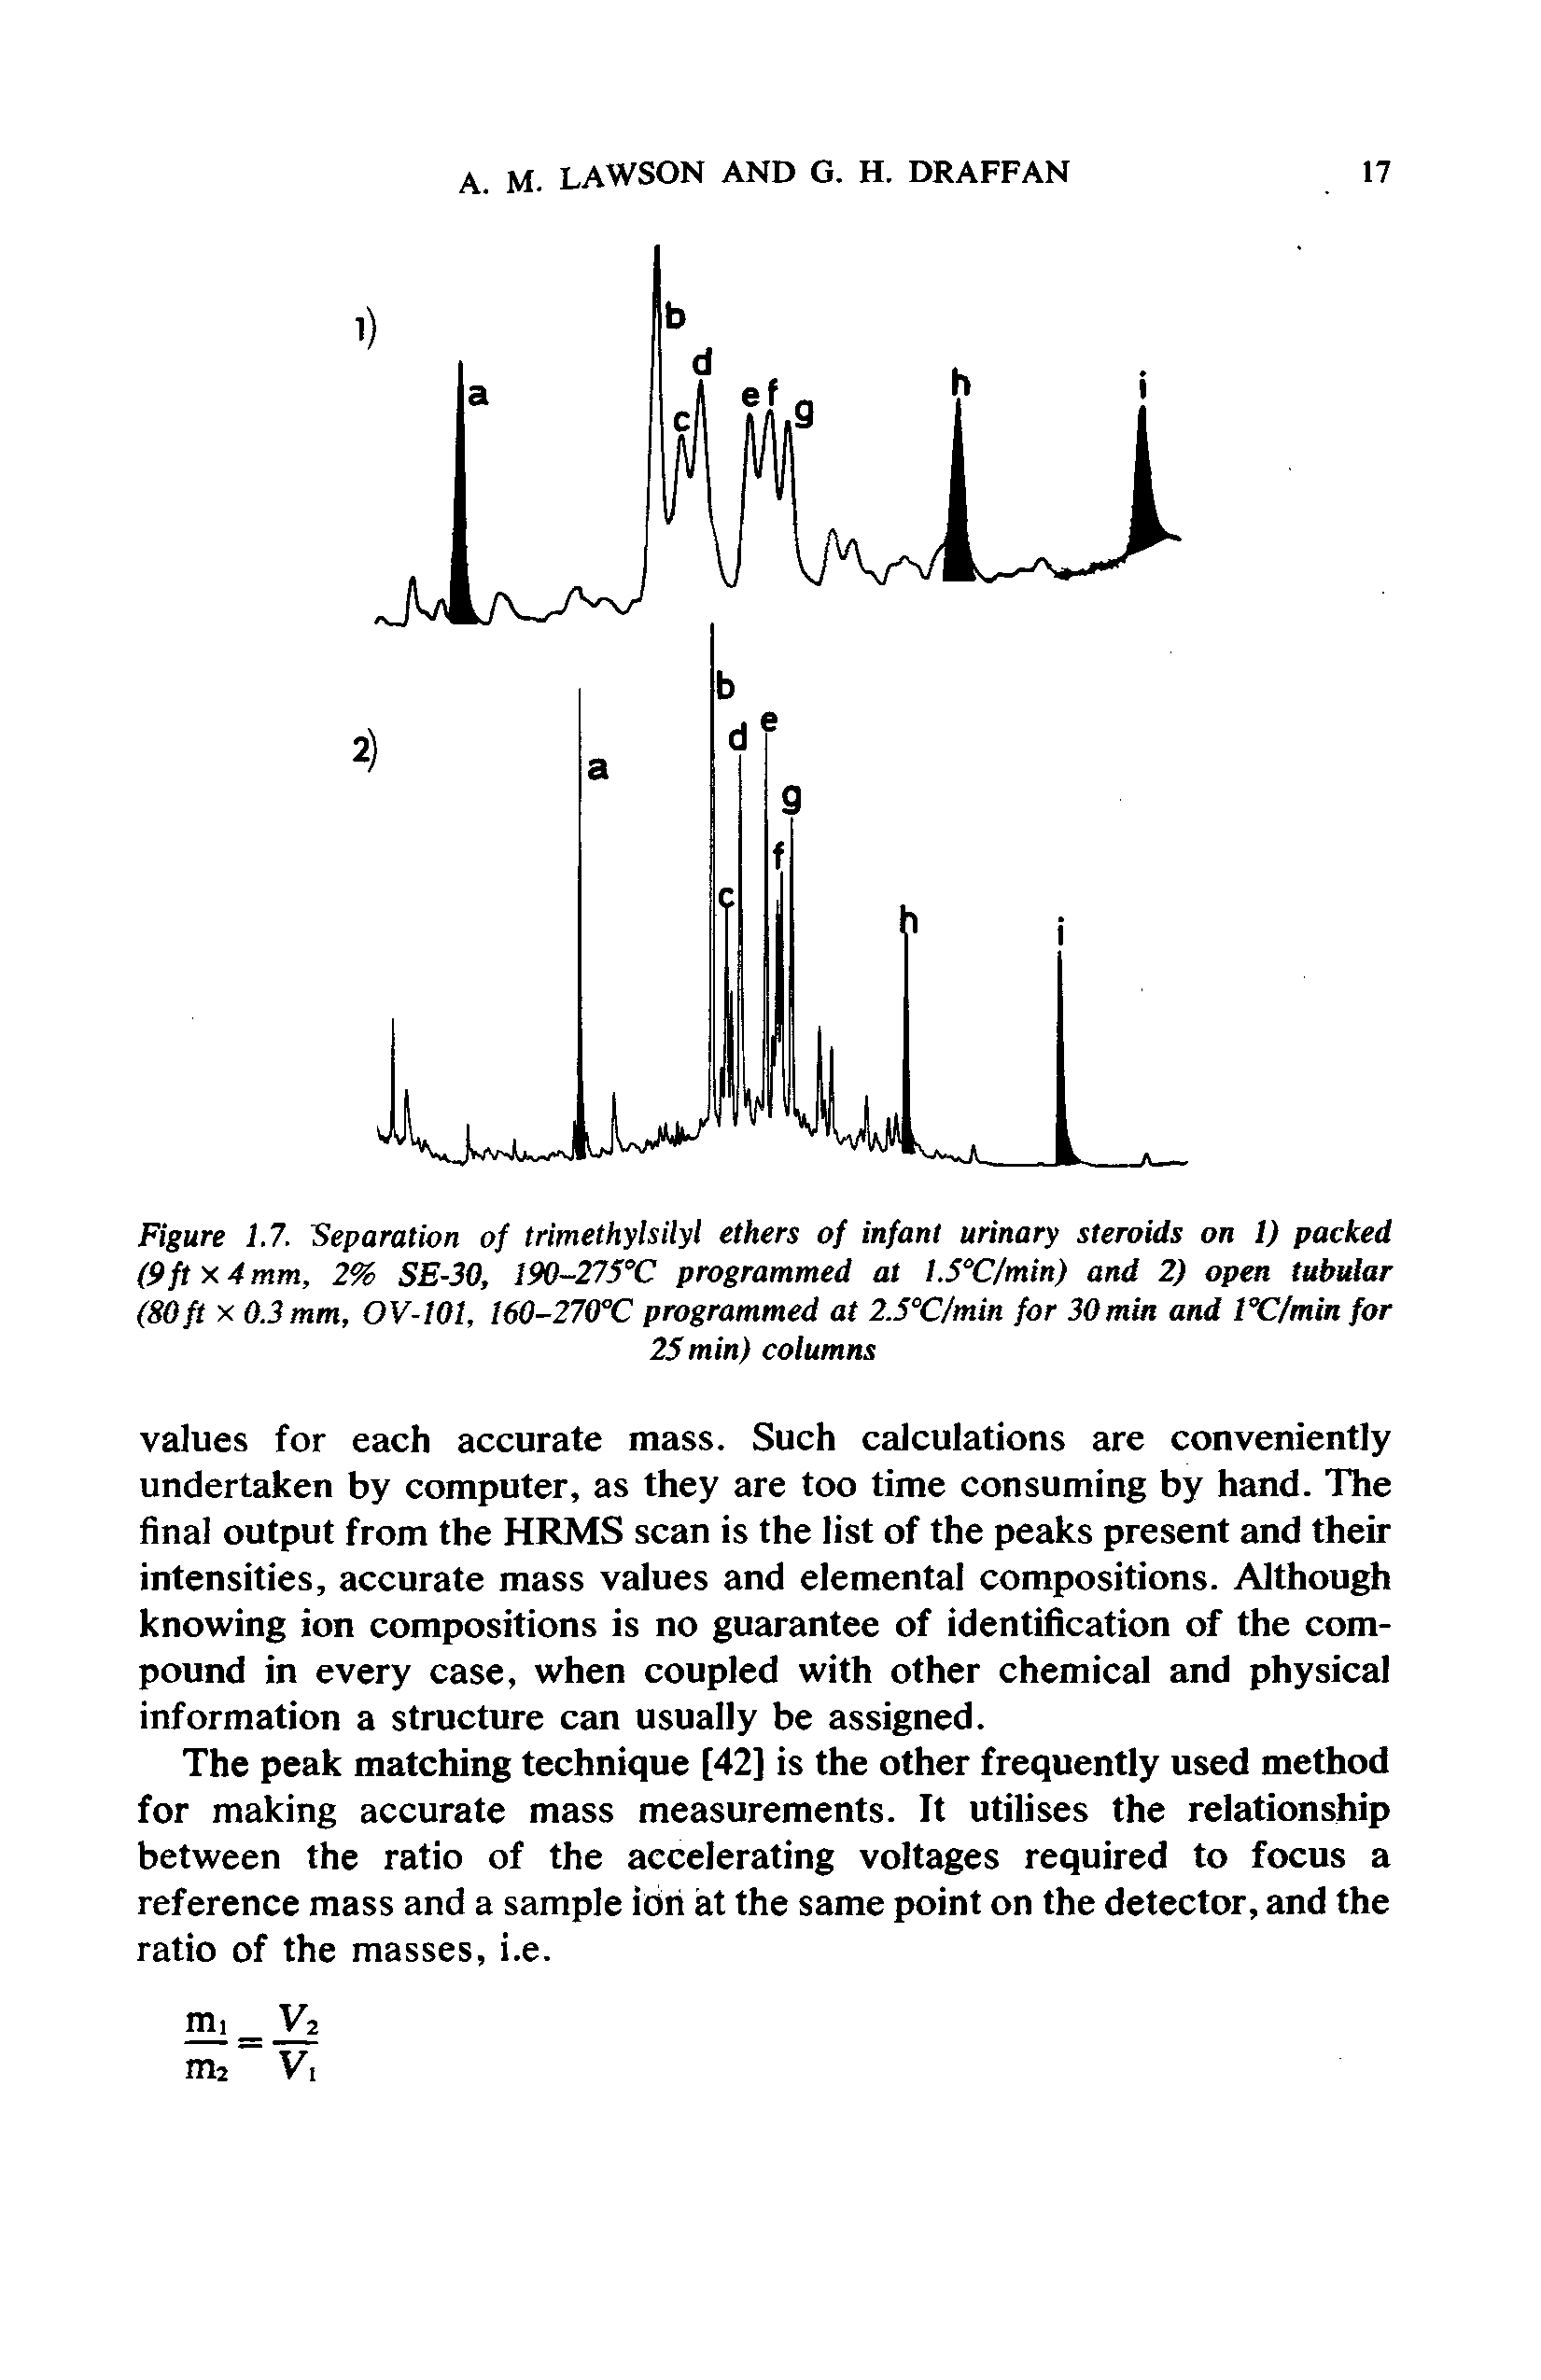 Figure 1.7. Reparation of trimethylsilyl ethers of infant urinary steroids on 1) packed (9 ft X 4 mm, 2% SE-30, 190-275°C programmed at l.5"C/min) and 2) open tubular (80ft X 0.3 mm, OV-101, 160-270 C programmed at 2.5°Clmin for 30 min and l°C/minfor...